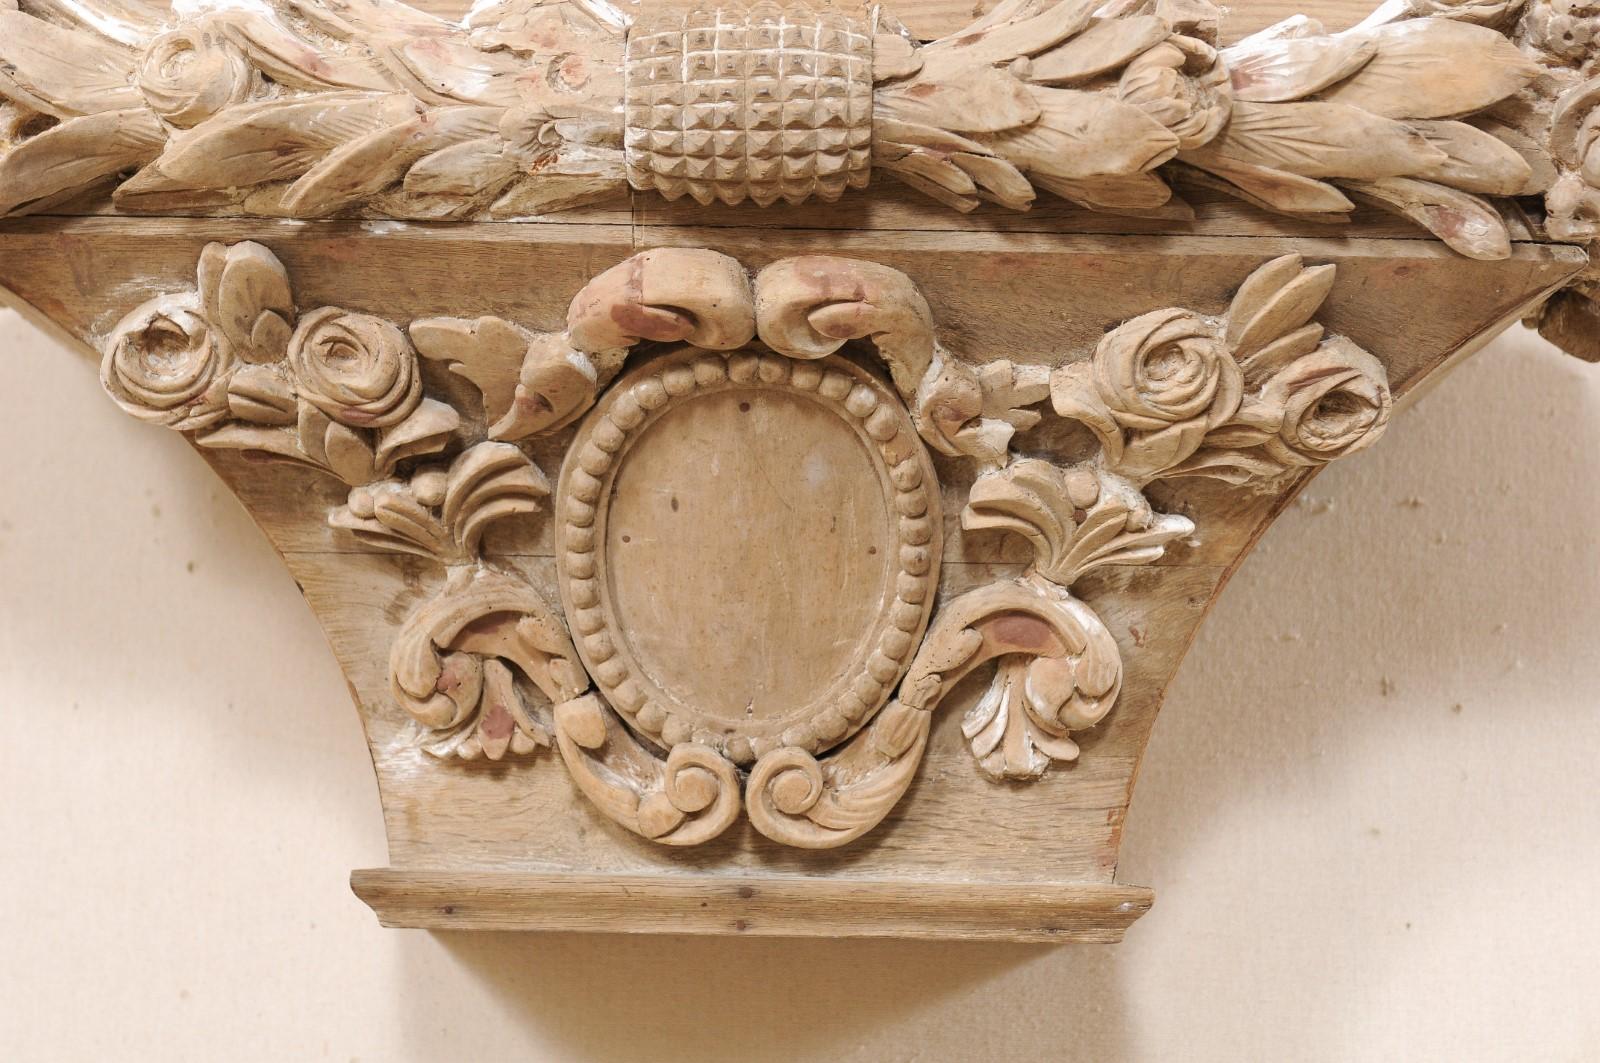 Spanish Carved-Wood Capital Decorative Architectural Wall Bracket, 19th Century For Sale 3